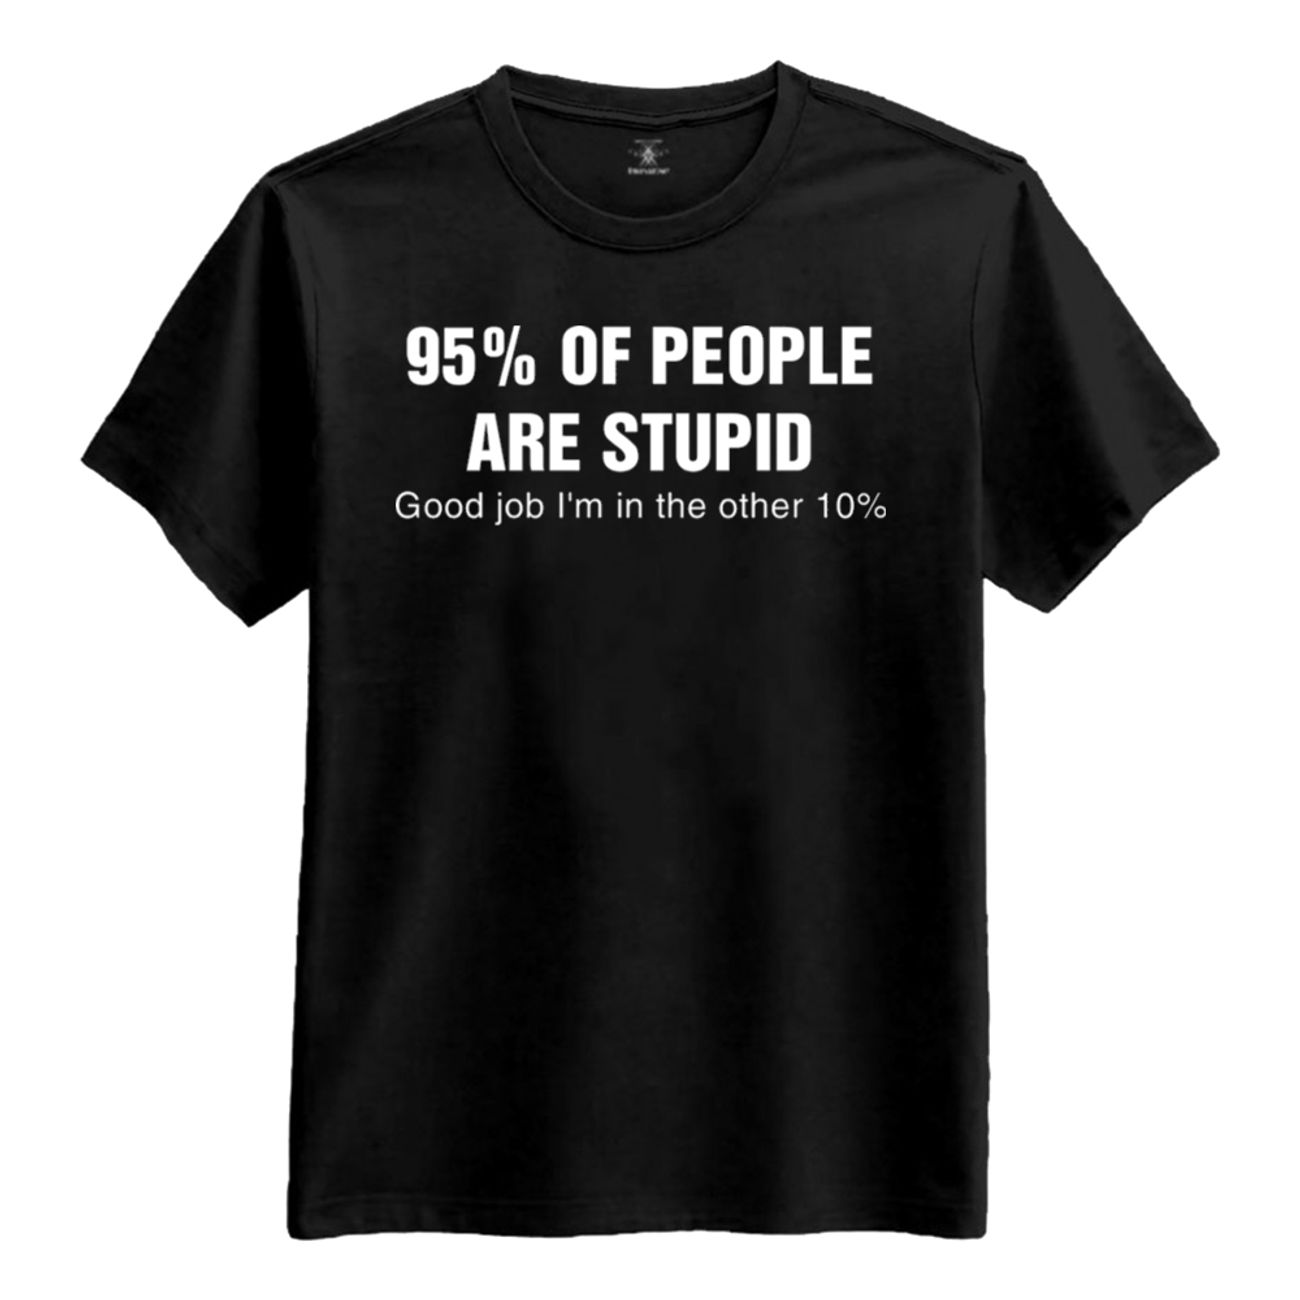 95-of-people-are-stupid-t-shirt-85373-2